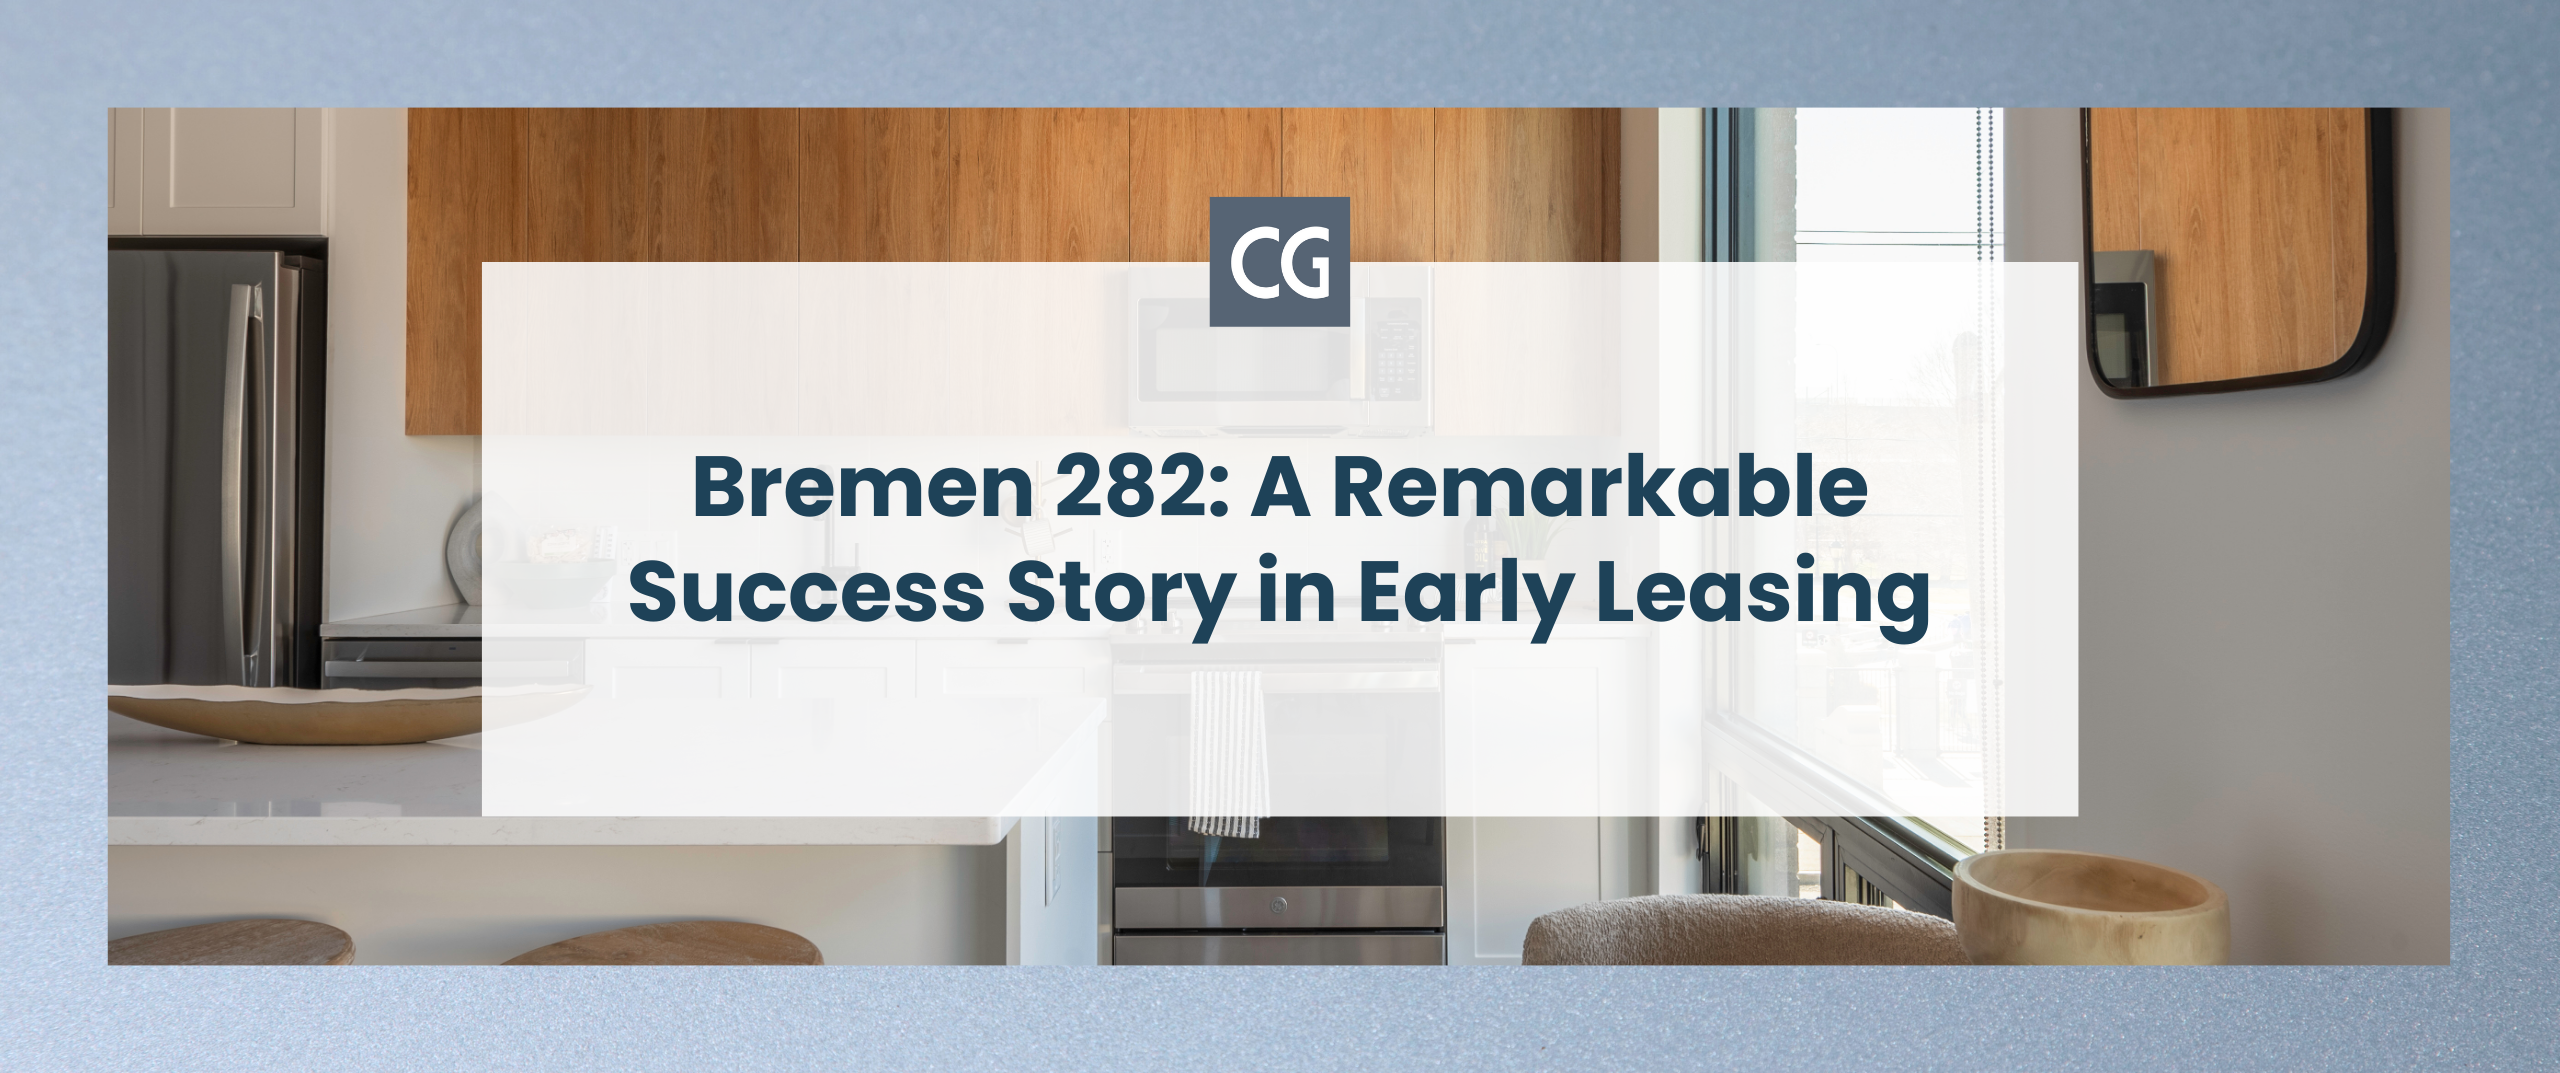 Bremen 282: A Remarkable Success Story in Early Leasing